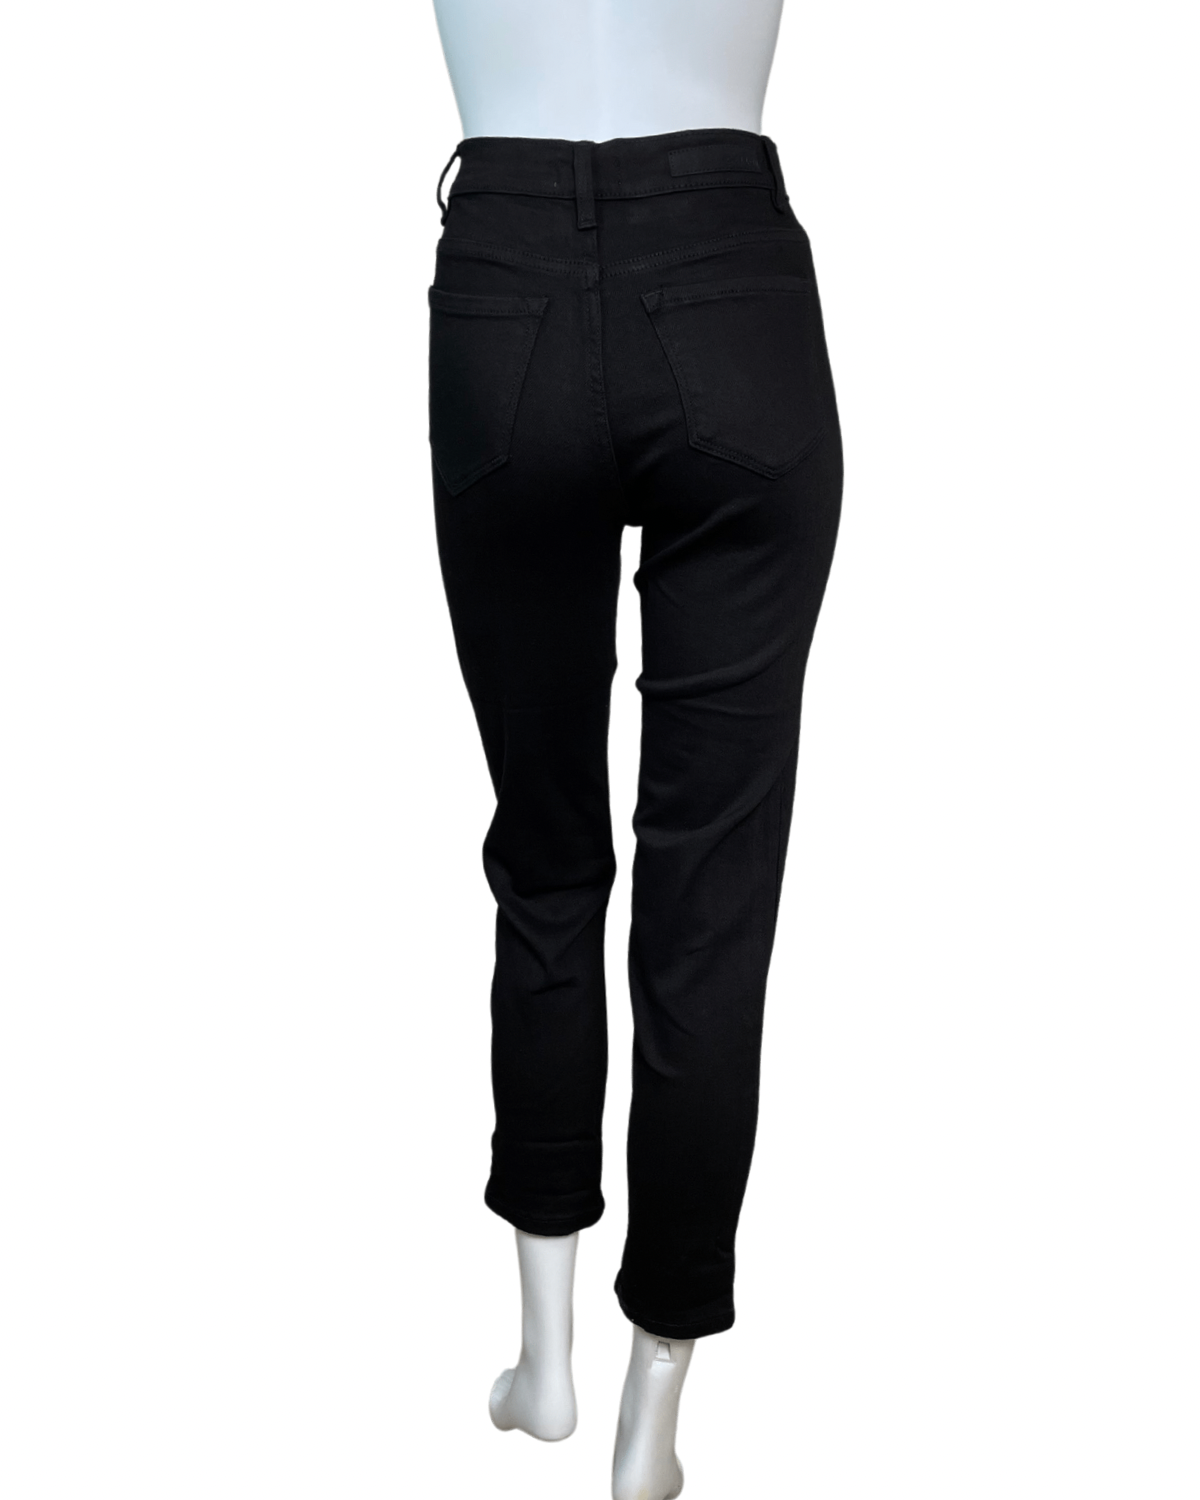 High Rise Mom Jeans in Black - Blackbird Boutique